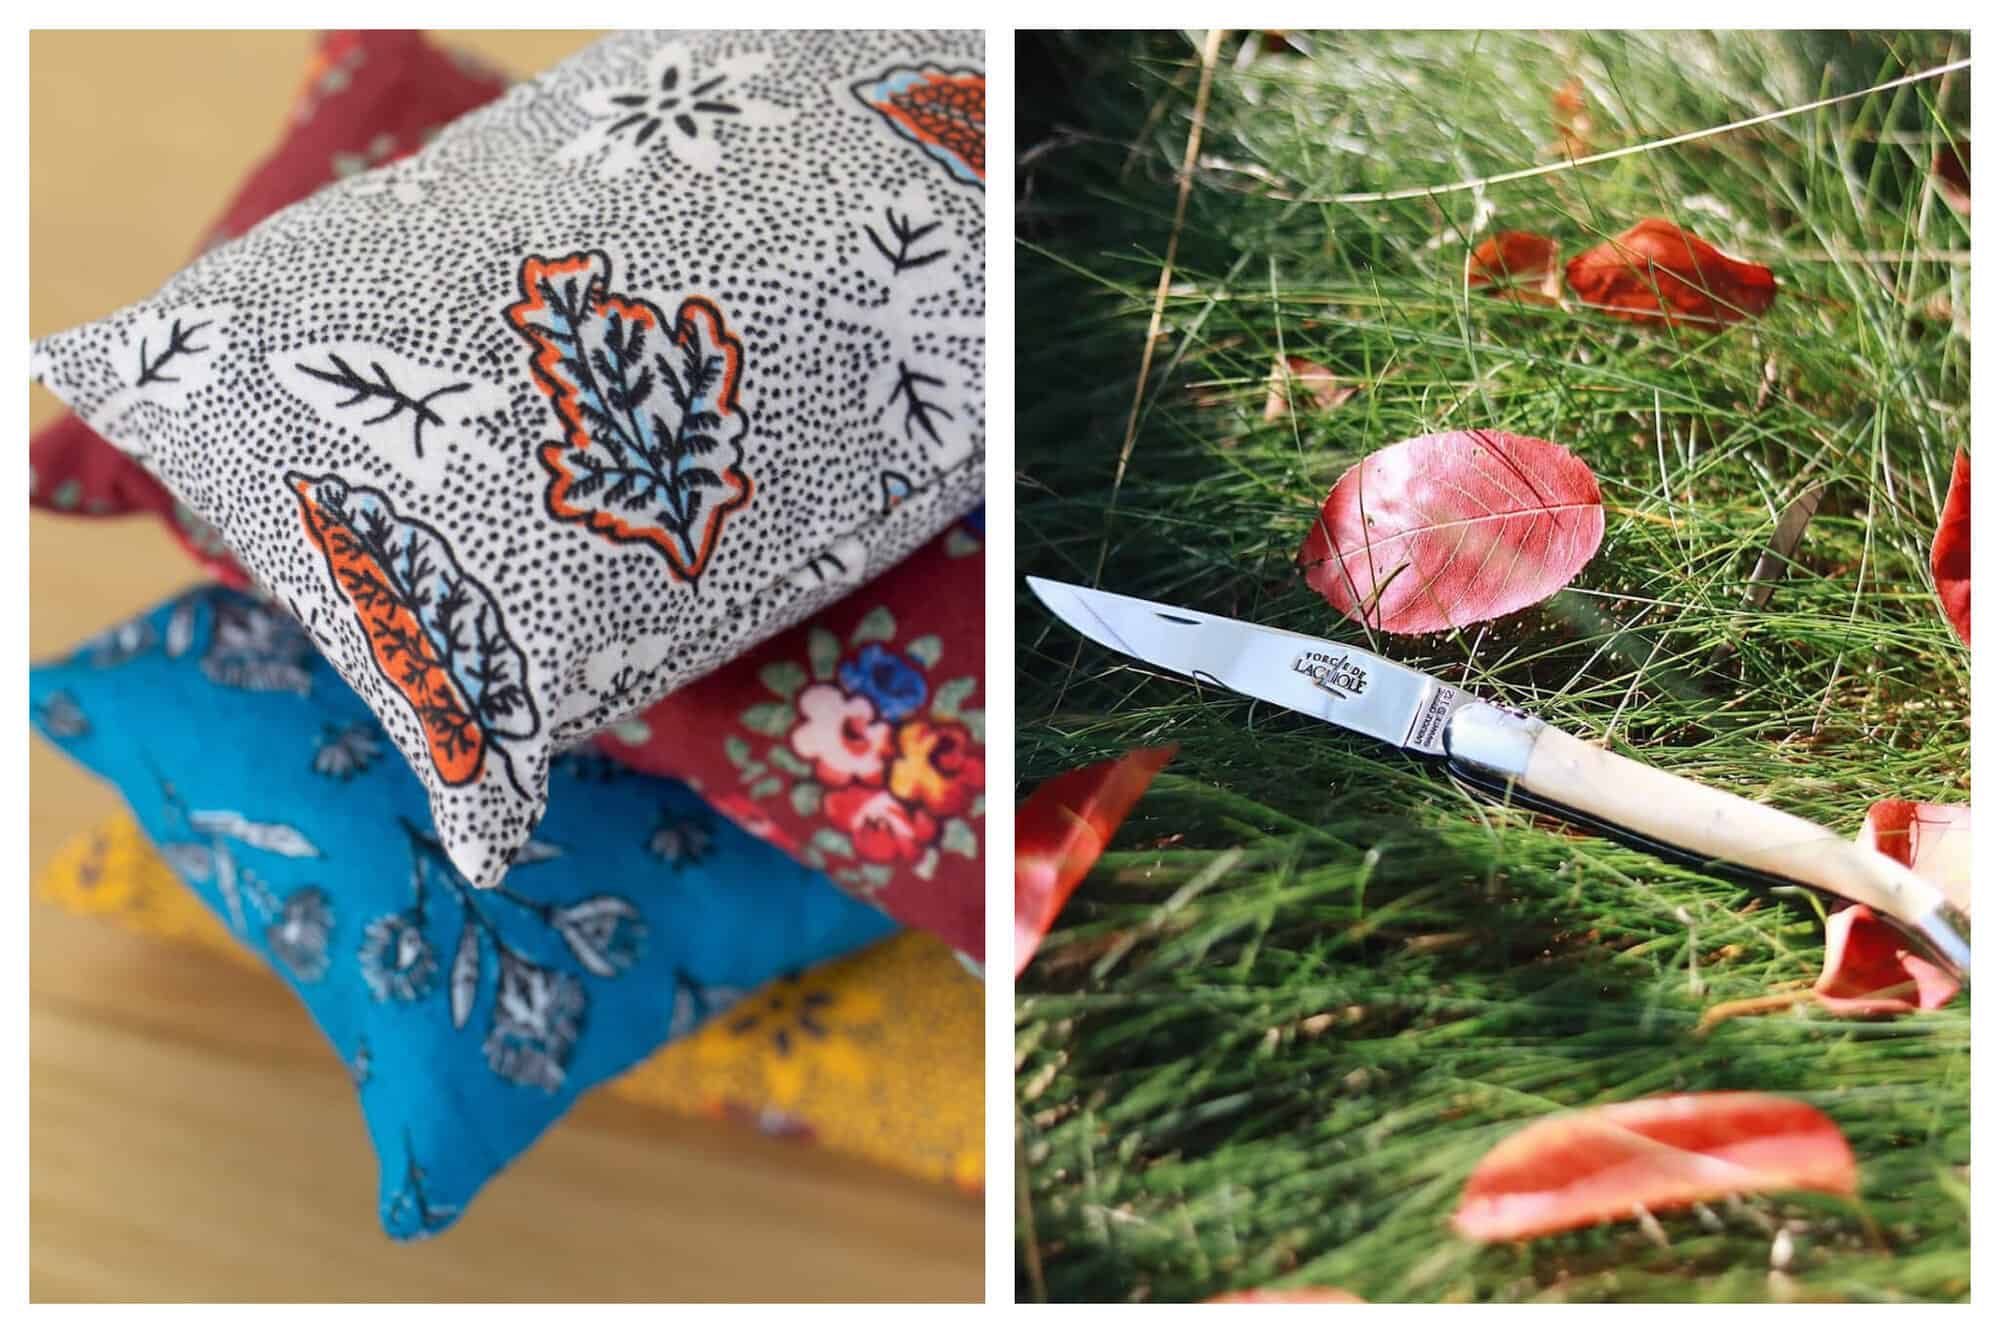 Left: a set of small colourful pillows with various flower patterns are stacked upon one another. Right: a Laguiole knife rests on green grass outdoors with a few autumnal coloured leaves next to them.